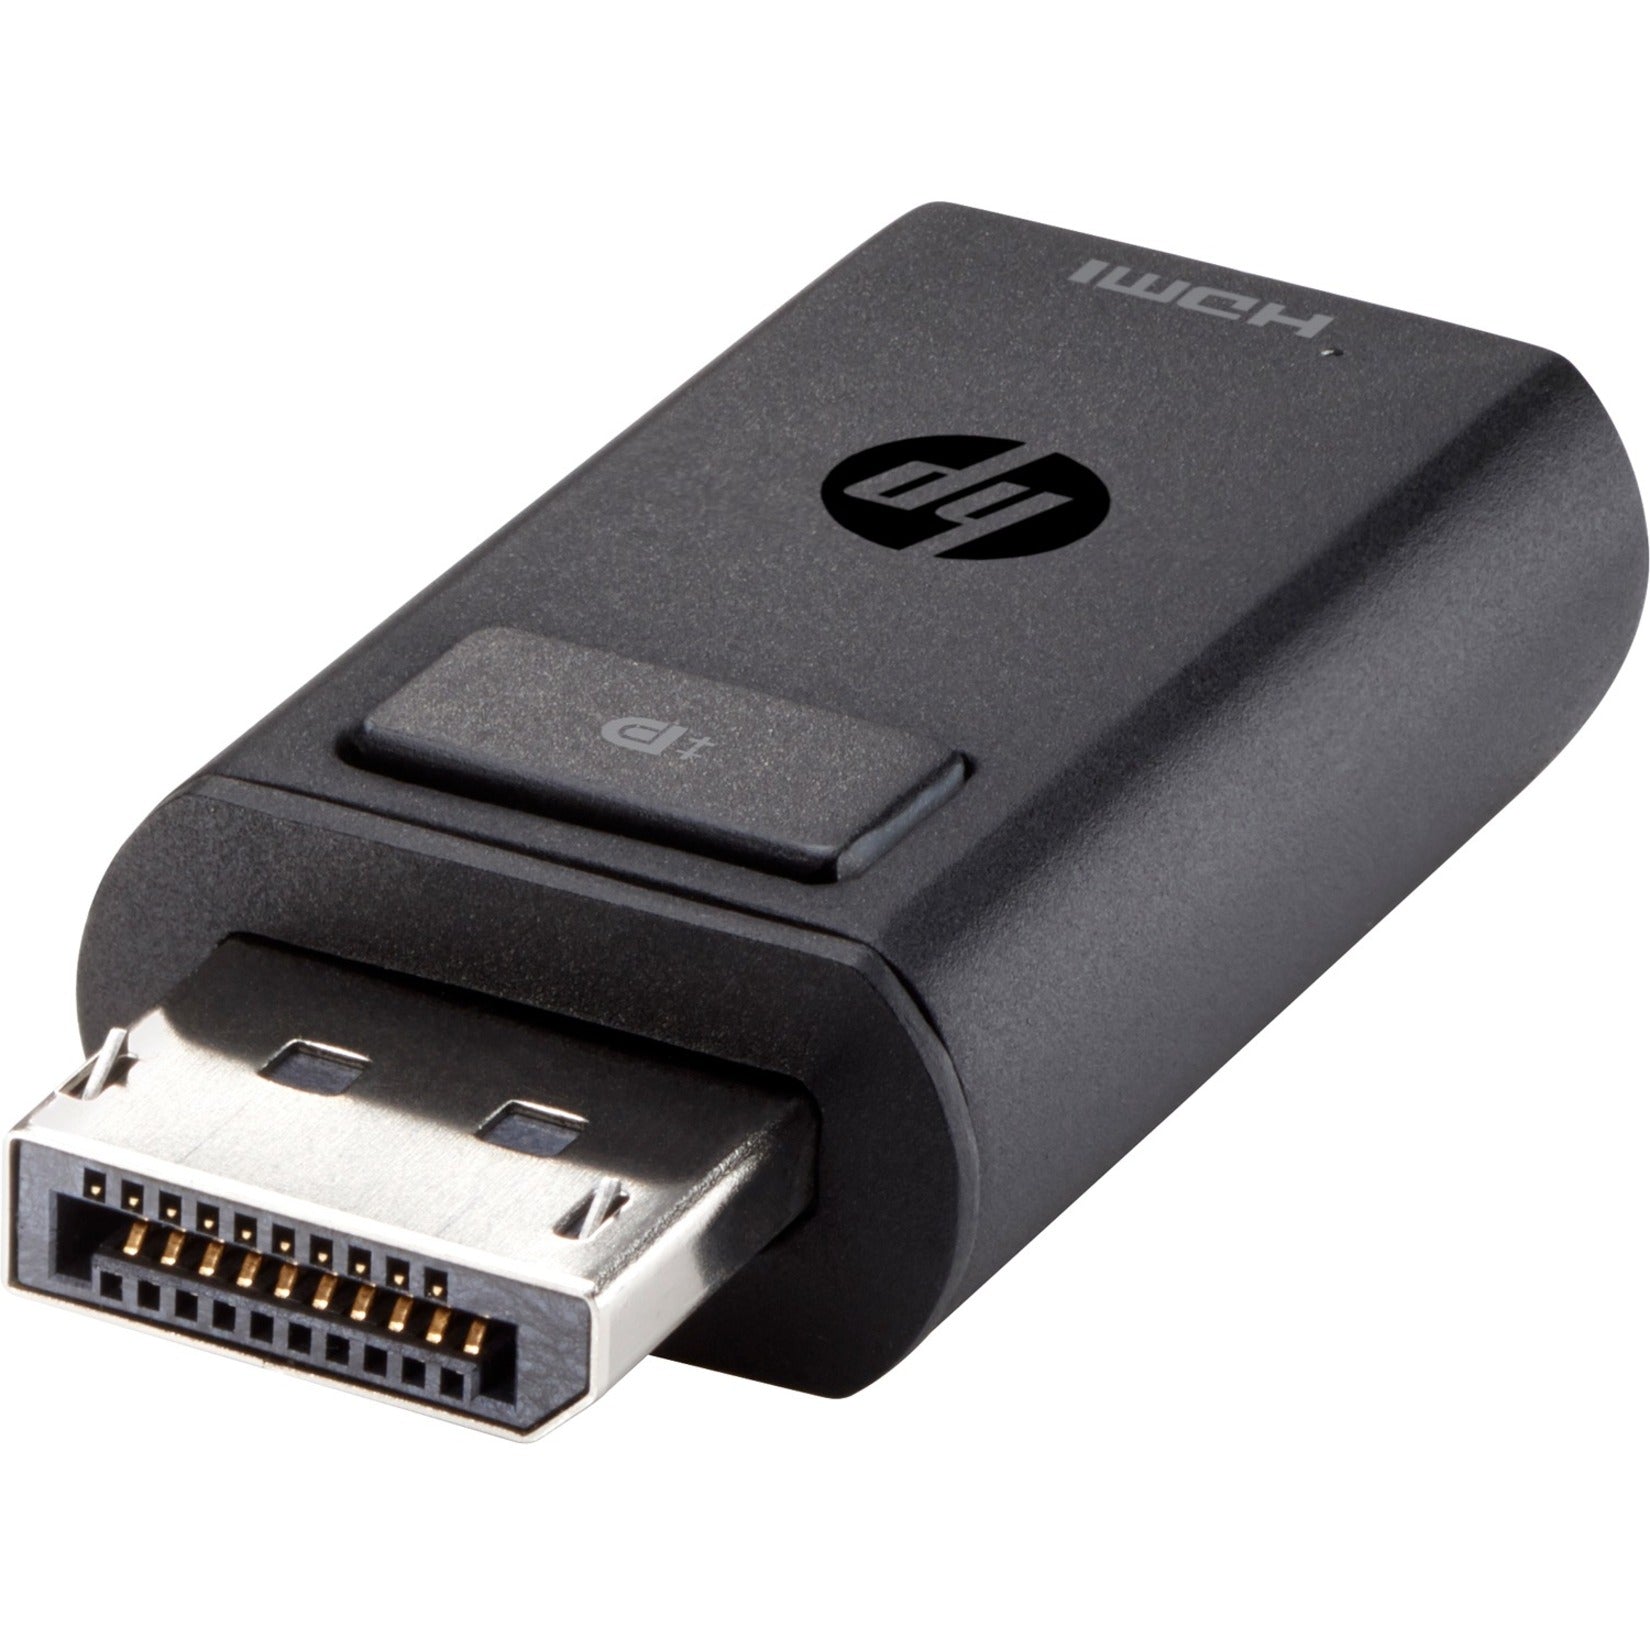 HP F3W43AA DisplayPort To HDMI 1.4 Adapter, Connect Your DisplayPort Device to an HDMI Display